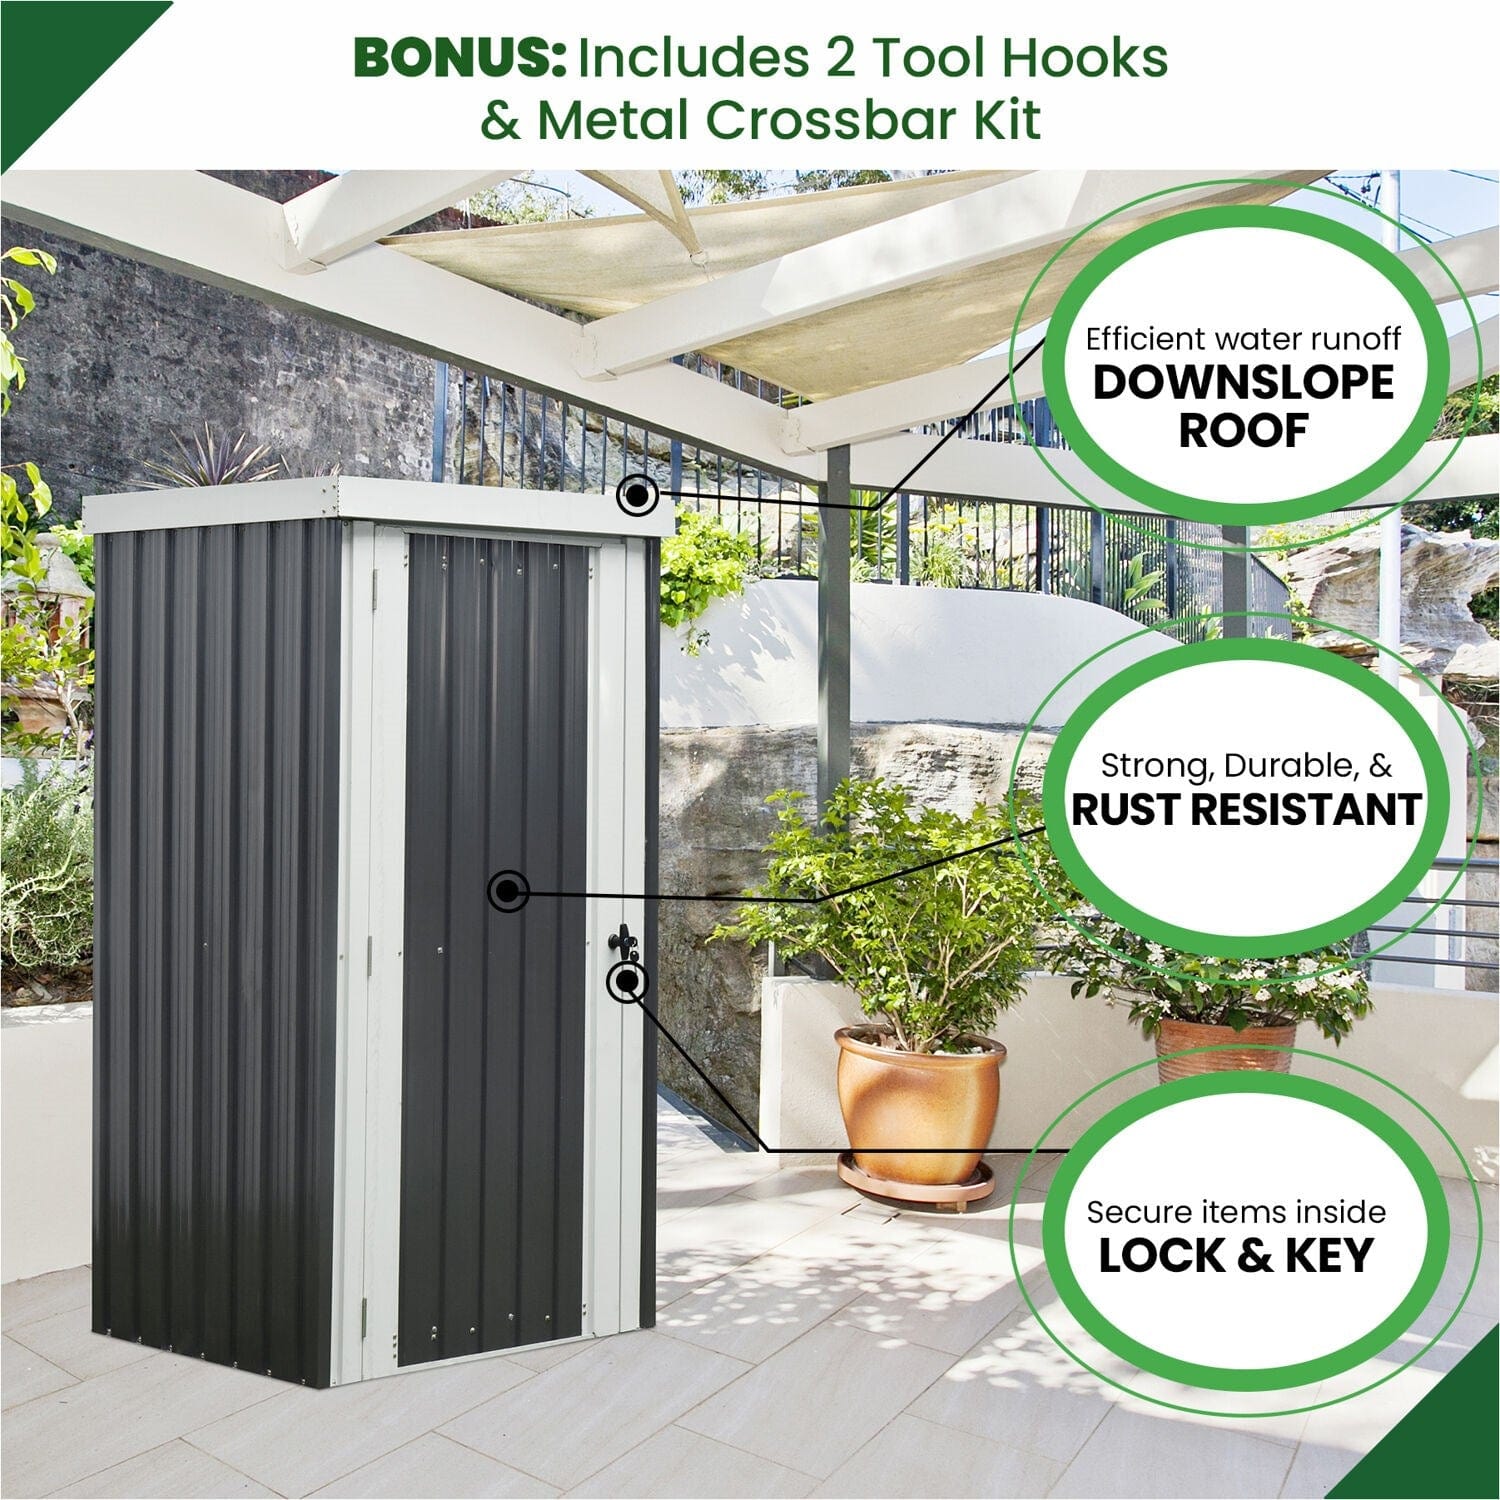 Hanover Hanover 3-Ft. x 3-Ft. x 6-Ft. Galvanized Steel Patio Storage Shed with Twist Lock and 2 Tool Hooks, Dark Gray/White